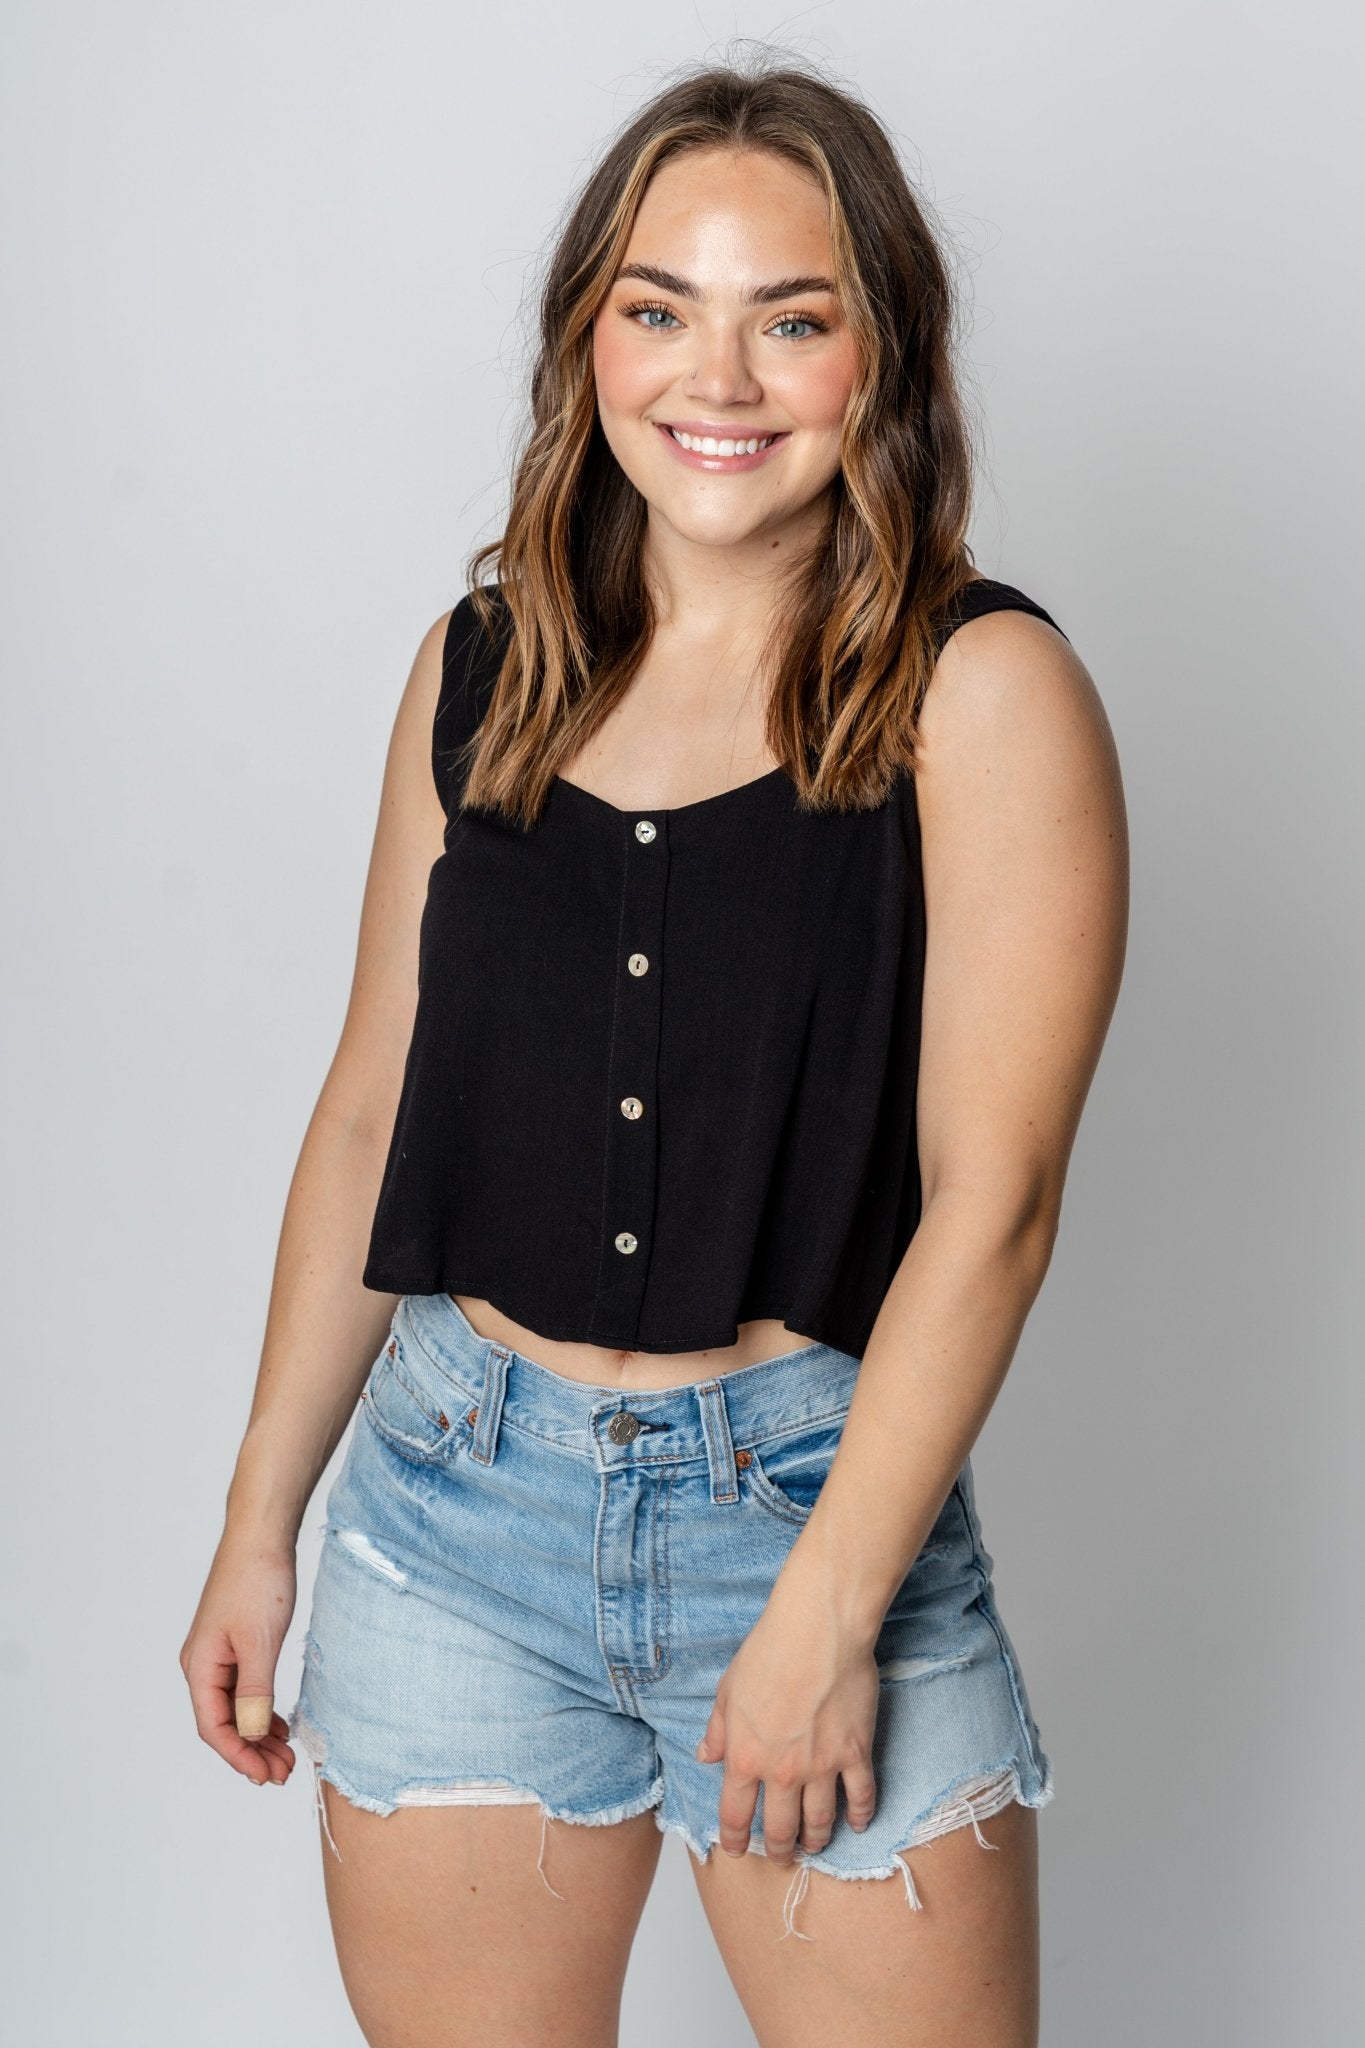 Cropped button tank top black - Affordable Top - Boutique Tank Tops at Lush Fashion Lounge Boutique in Oklahoma City